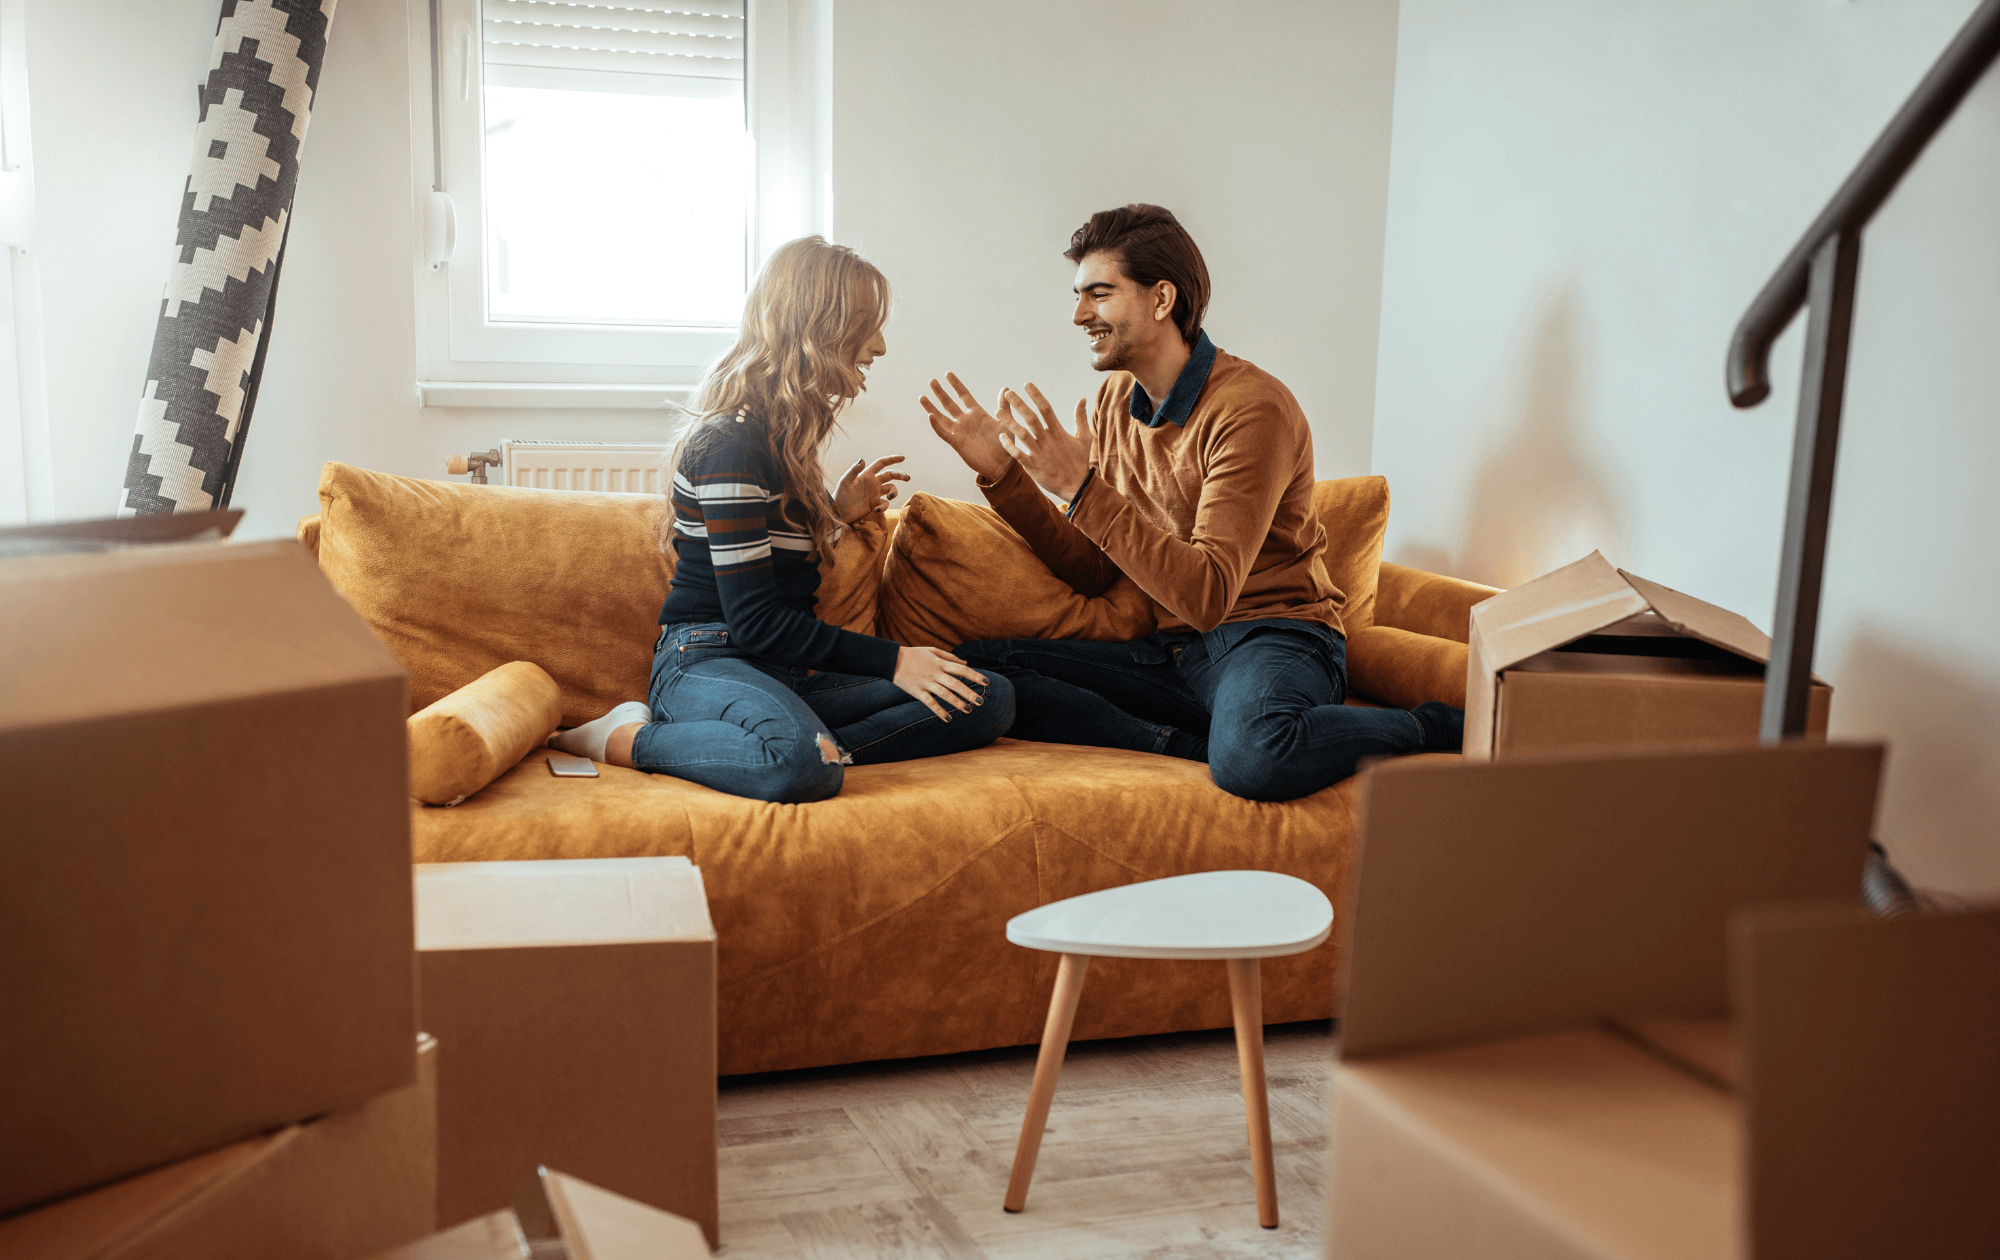 AM I IN A COMMON-LAW RELATIONSHIP AFTER 2 YEARS LIVING TOGETHER?